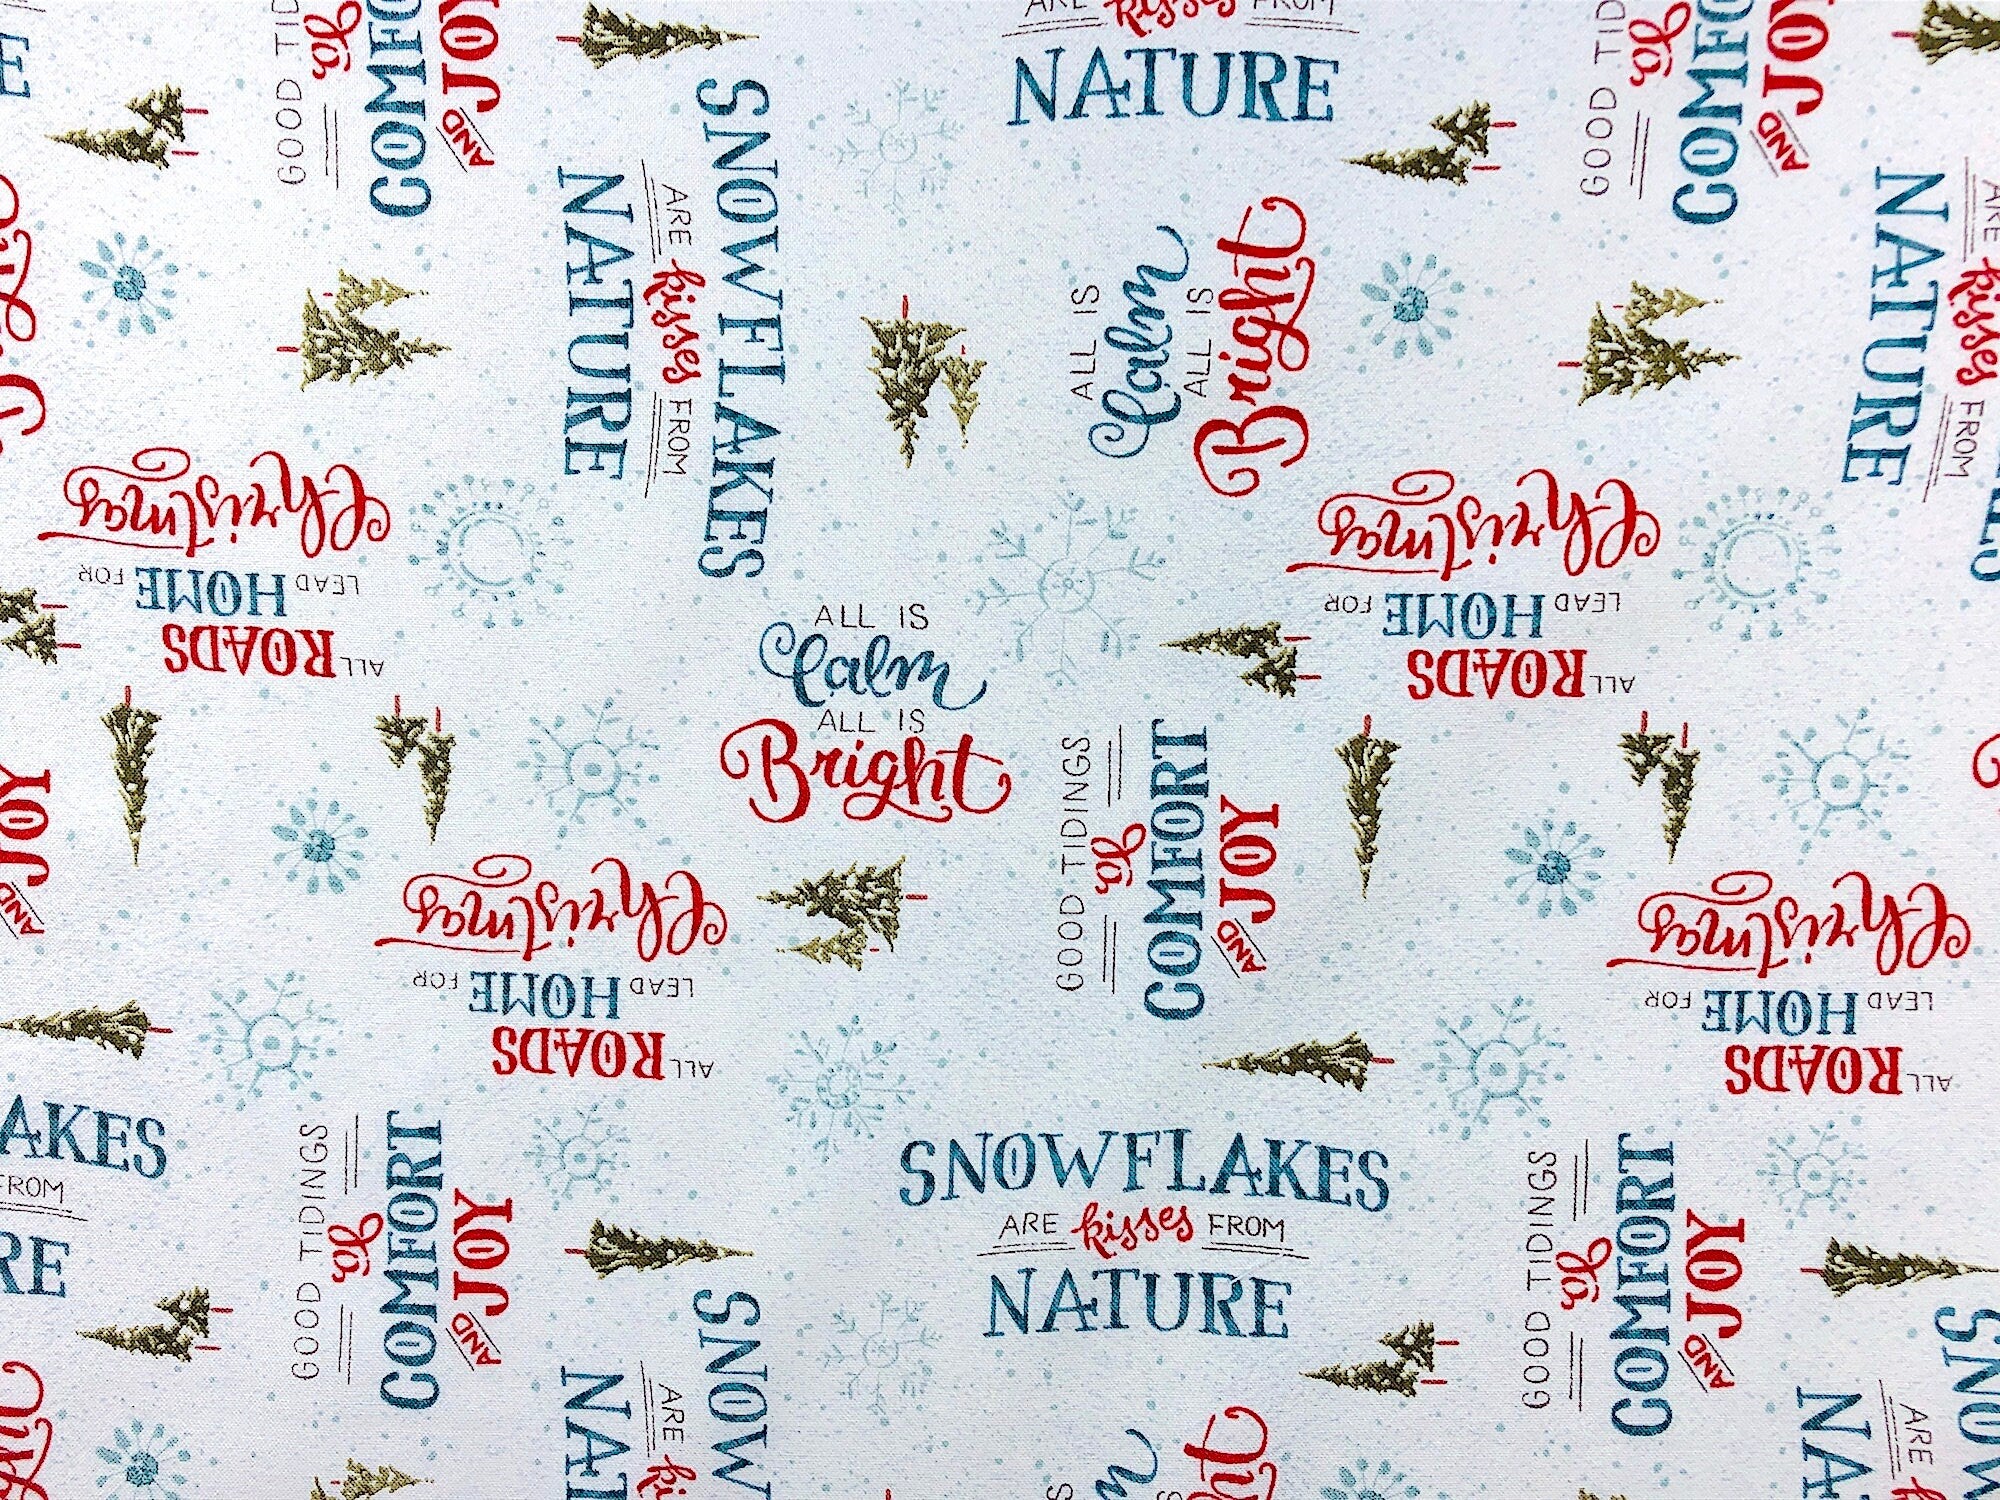 This fabric is called A Magical Christmas and is covered with trees, snowflakes and Christmas Sayings. Some of the sayings are All is Calm All is Bright, Good Tidings of Comfort and Joy and Snowflakes are kisses from nature.